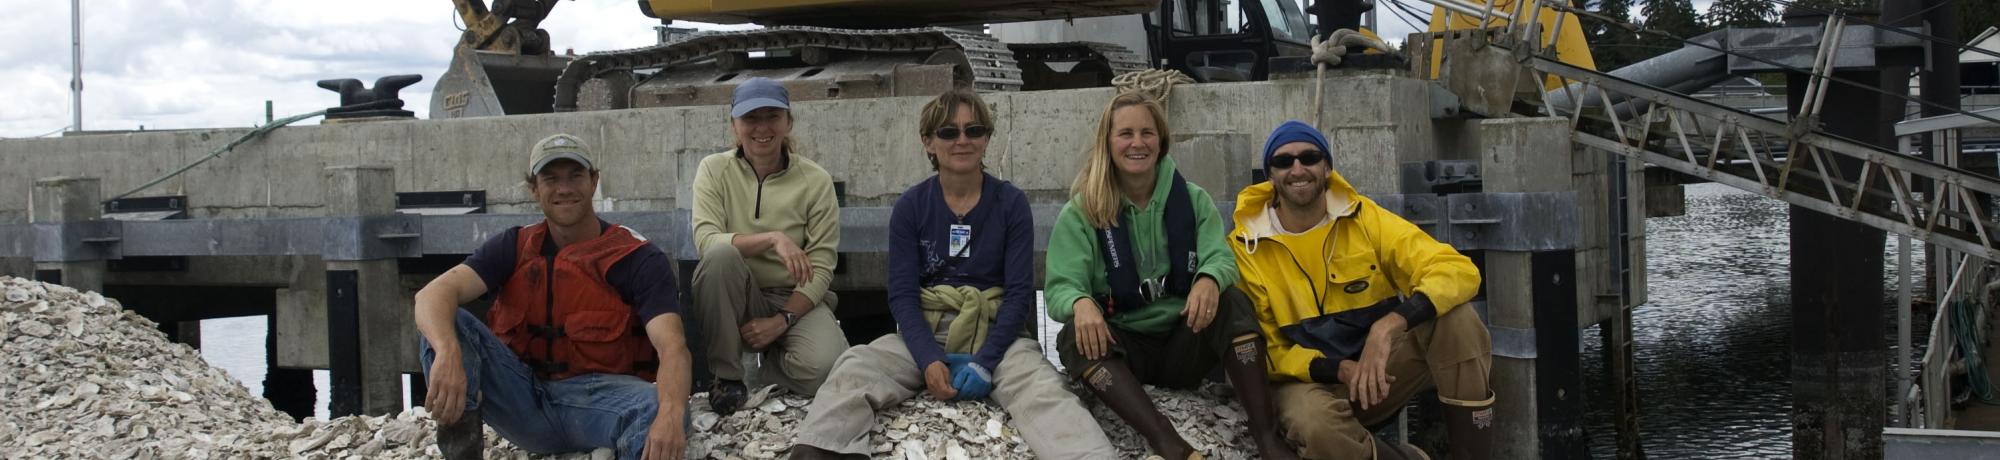 Oyster restoration crew on shell pile